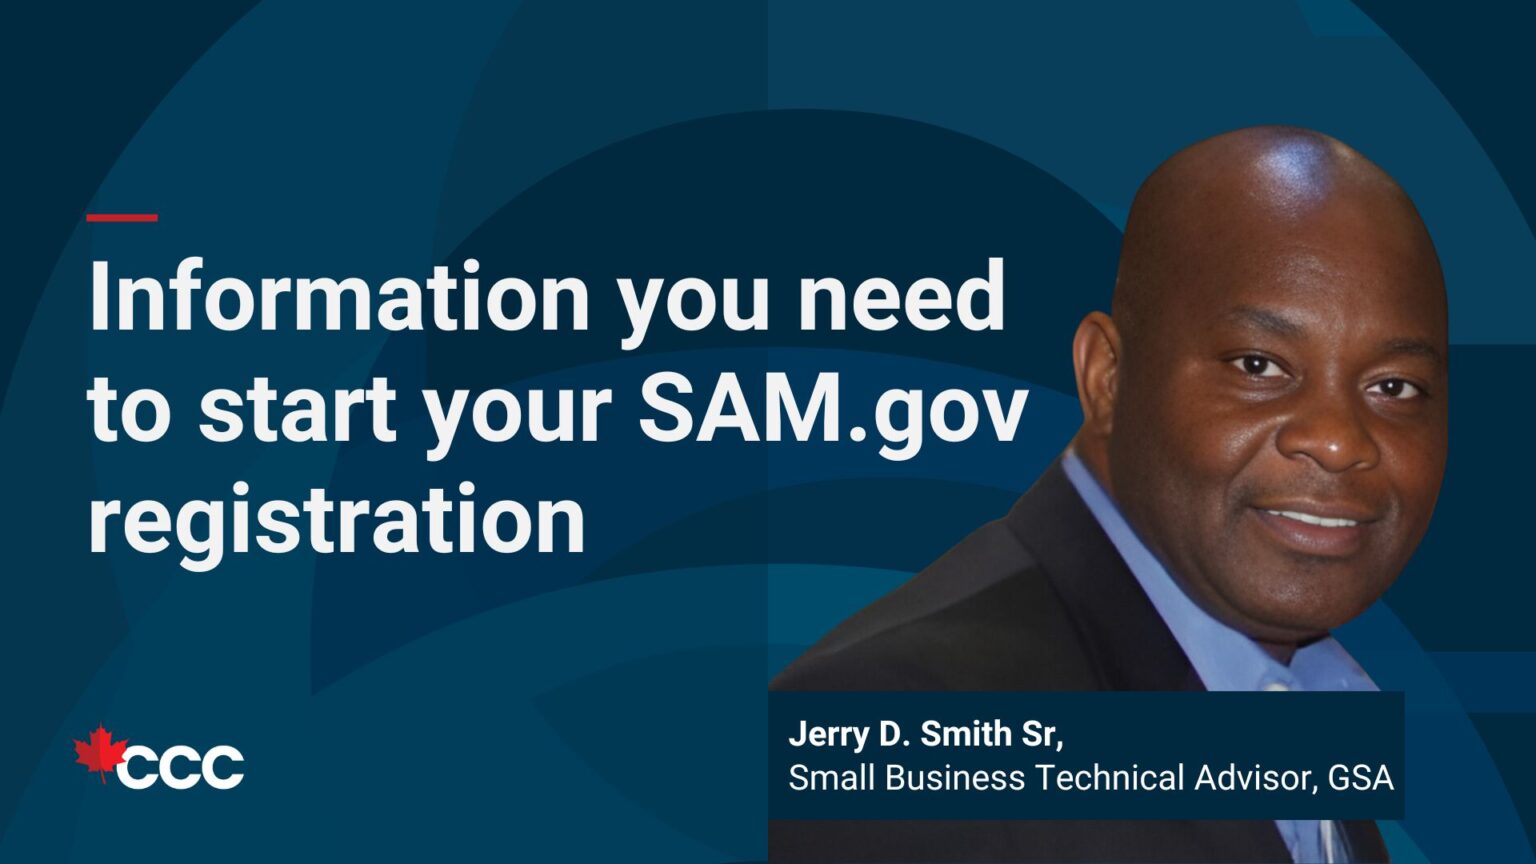 Information you need to get started with your SAM.gov account.